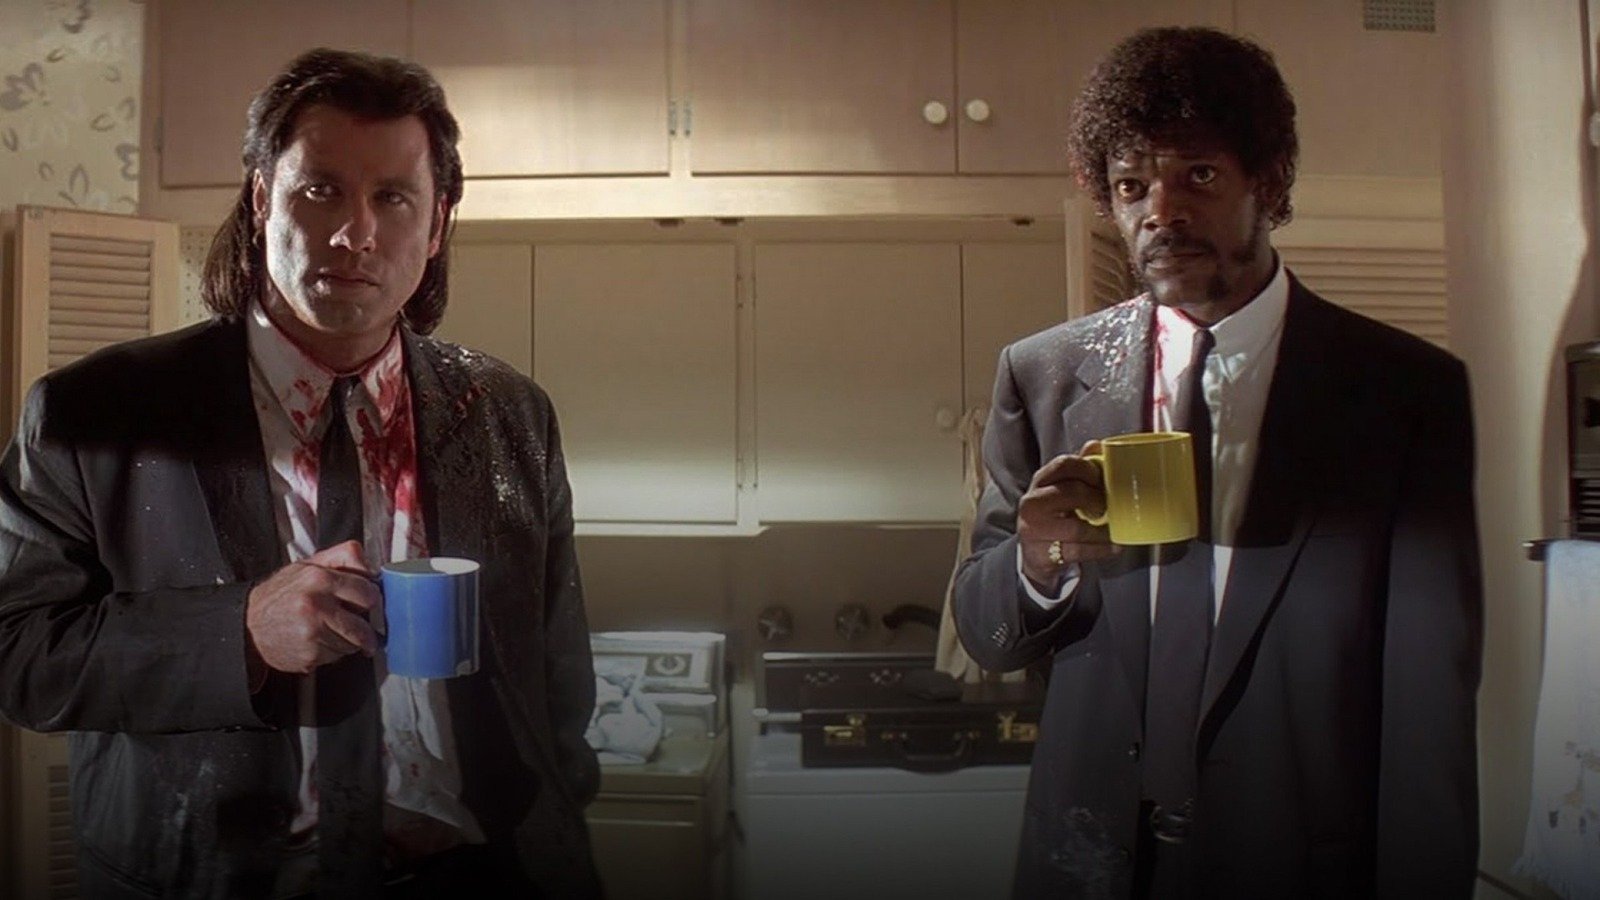 Quentin Tarantino Wrote Pulp Fiction So No One Character Would Work On Their Own - /Film